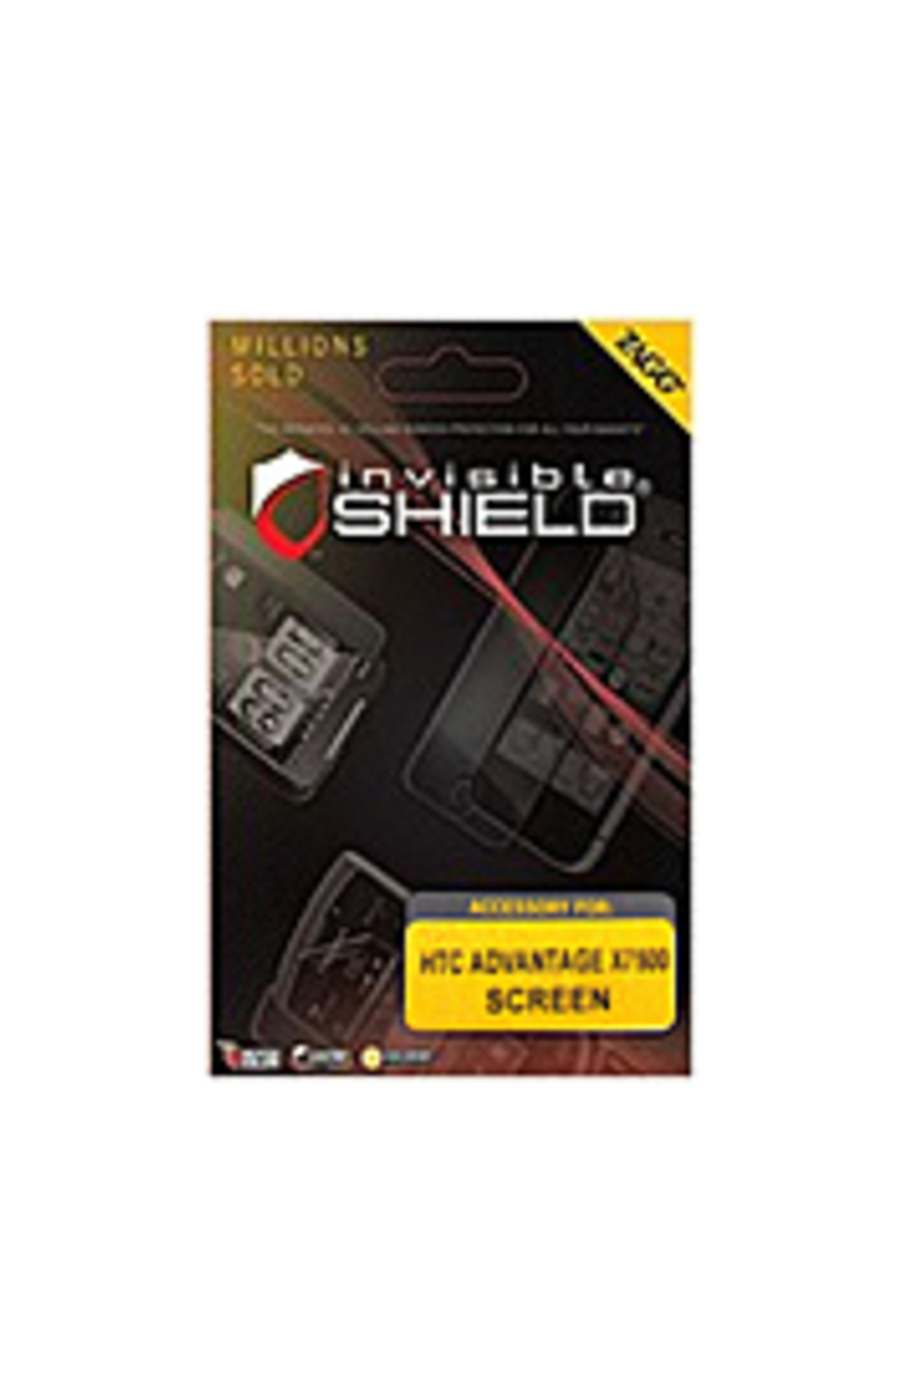 Zagg InvisibleSHIELD HTCX7500S Screen Protector for HTC X7500